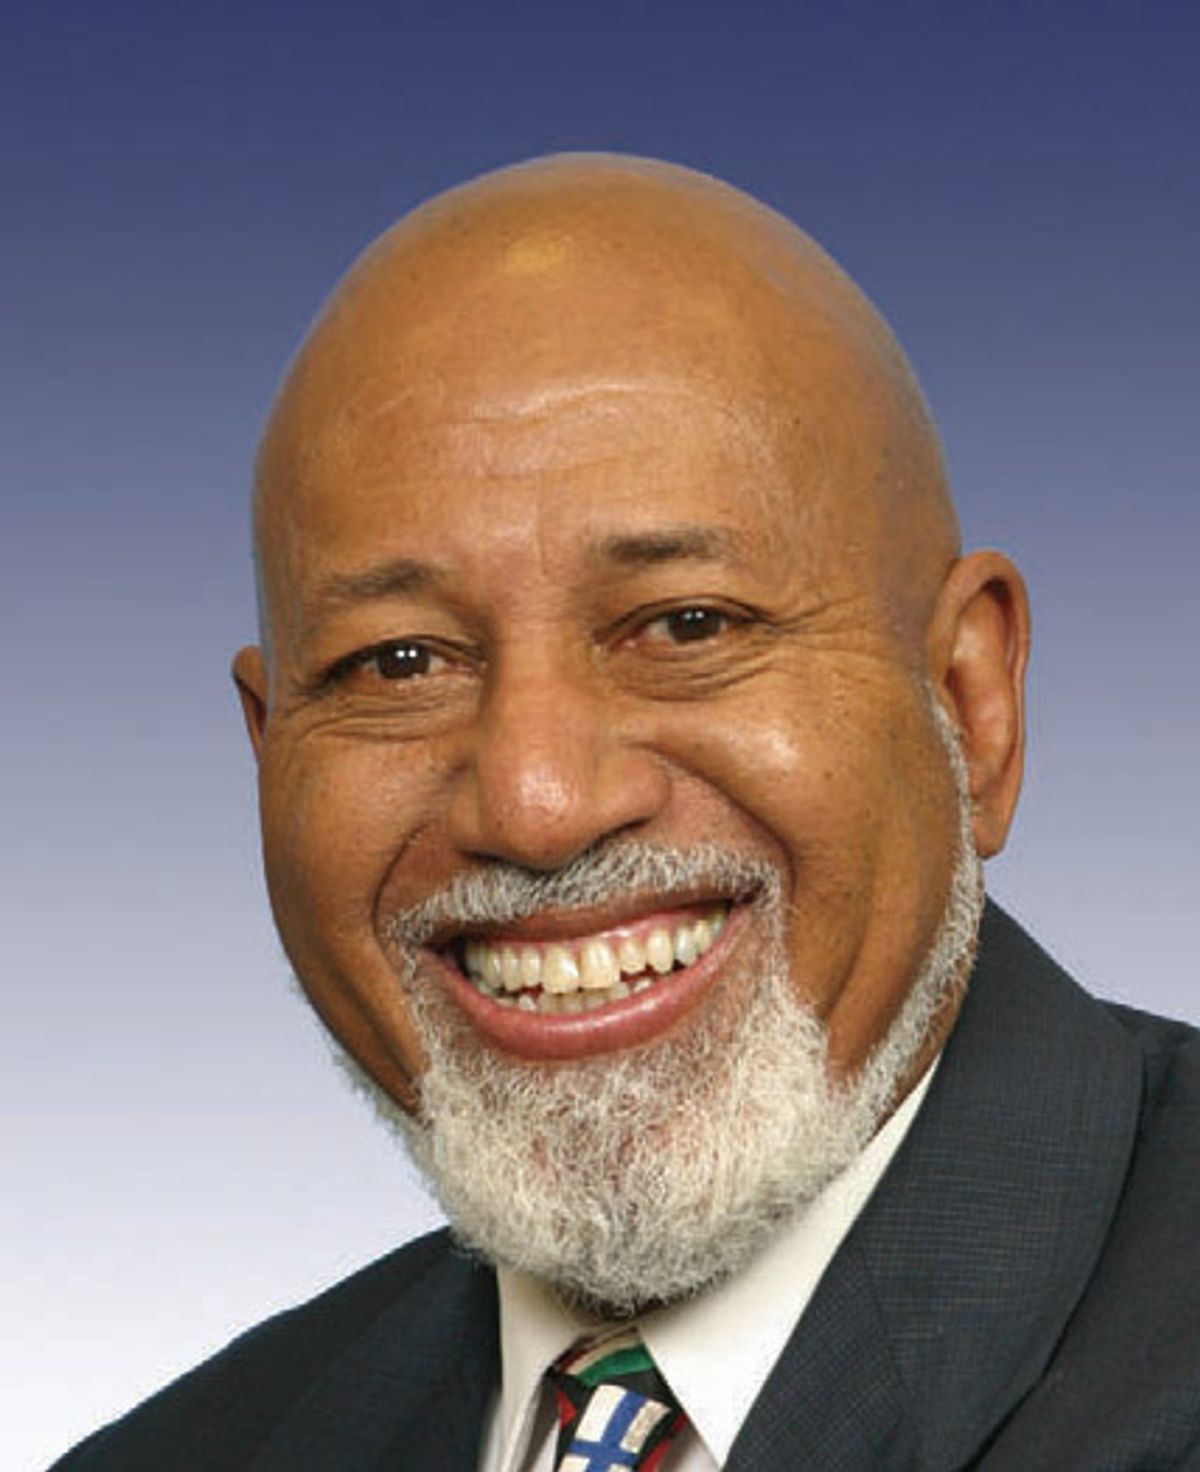 Official photograph or Representative Alcee Hastings   